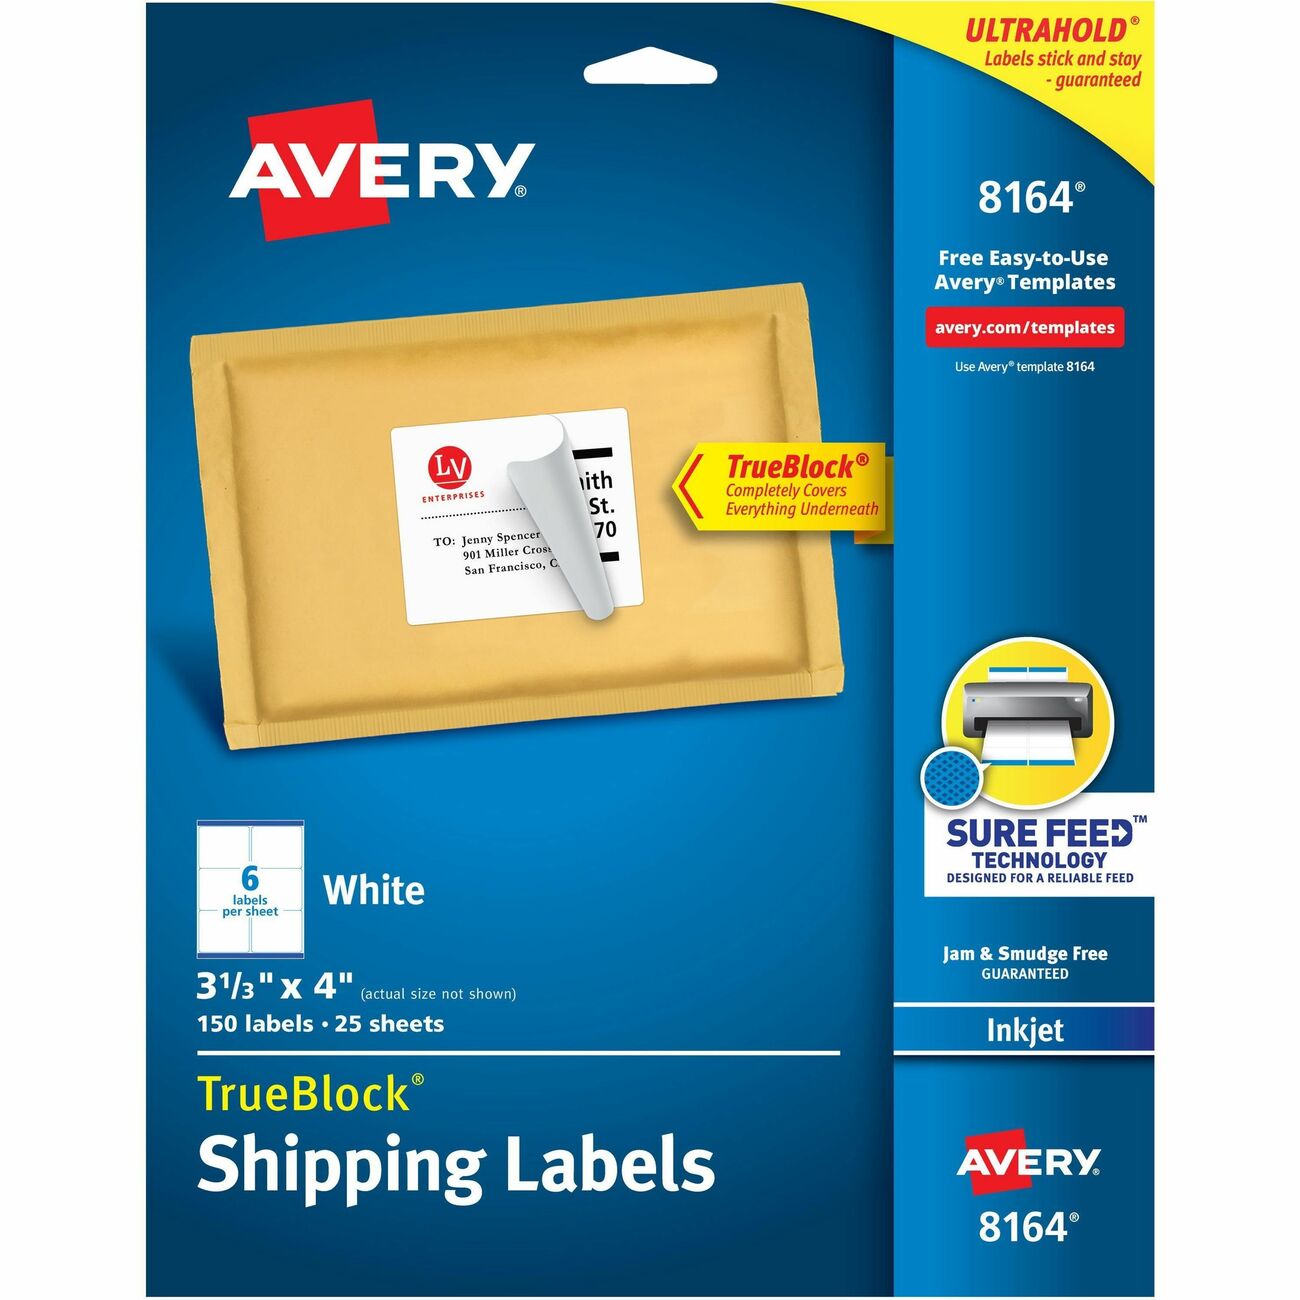 avery-label-templates-for-mac-laptopbrown